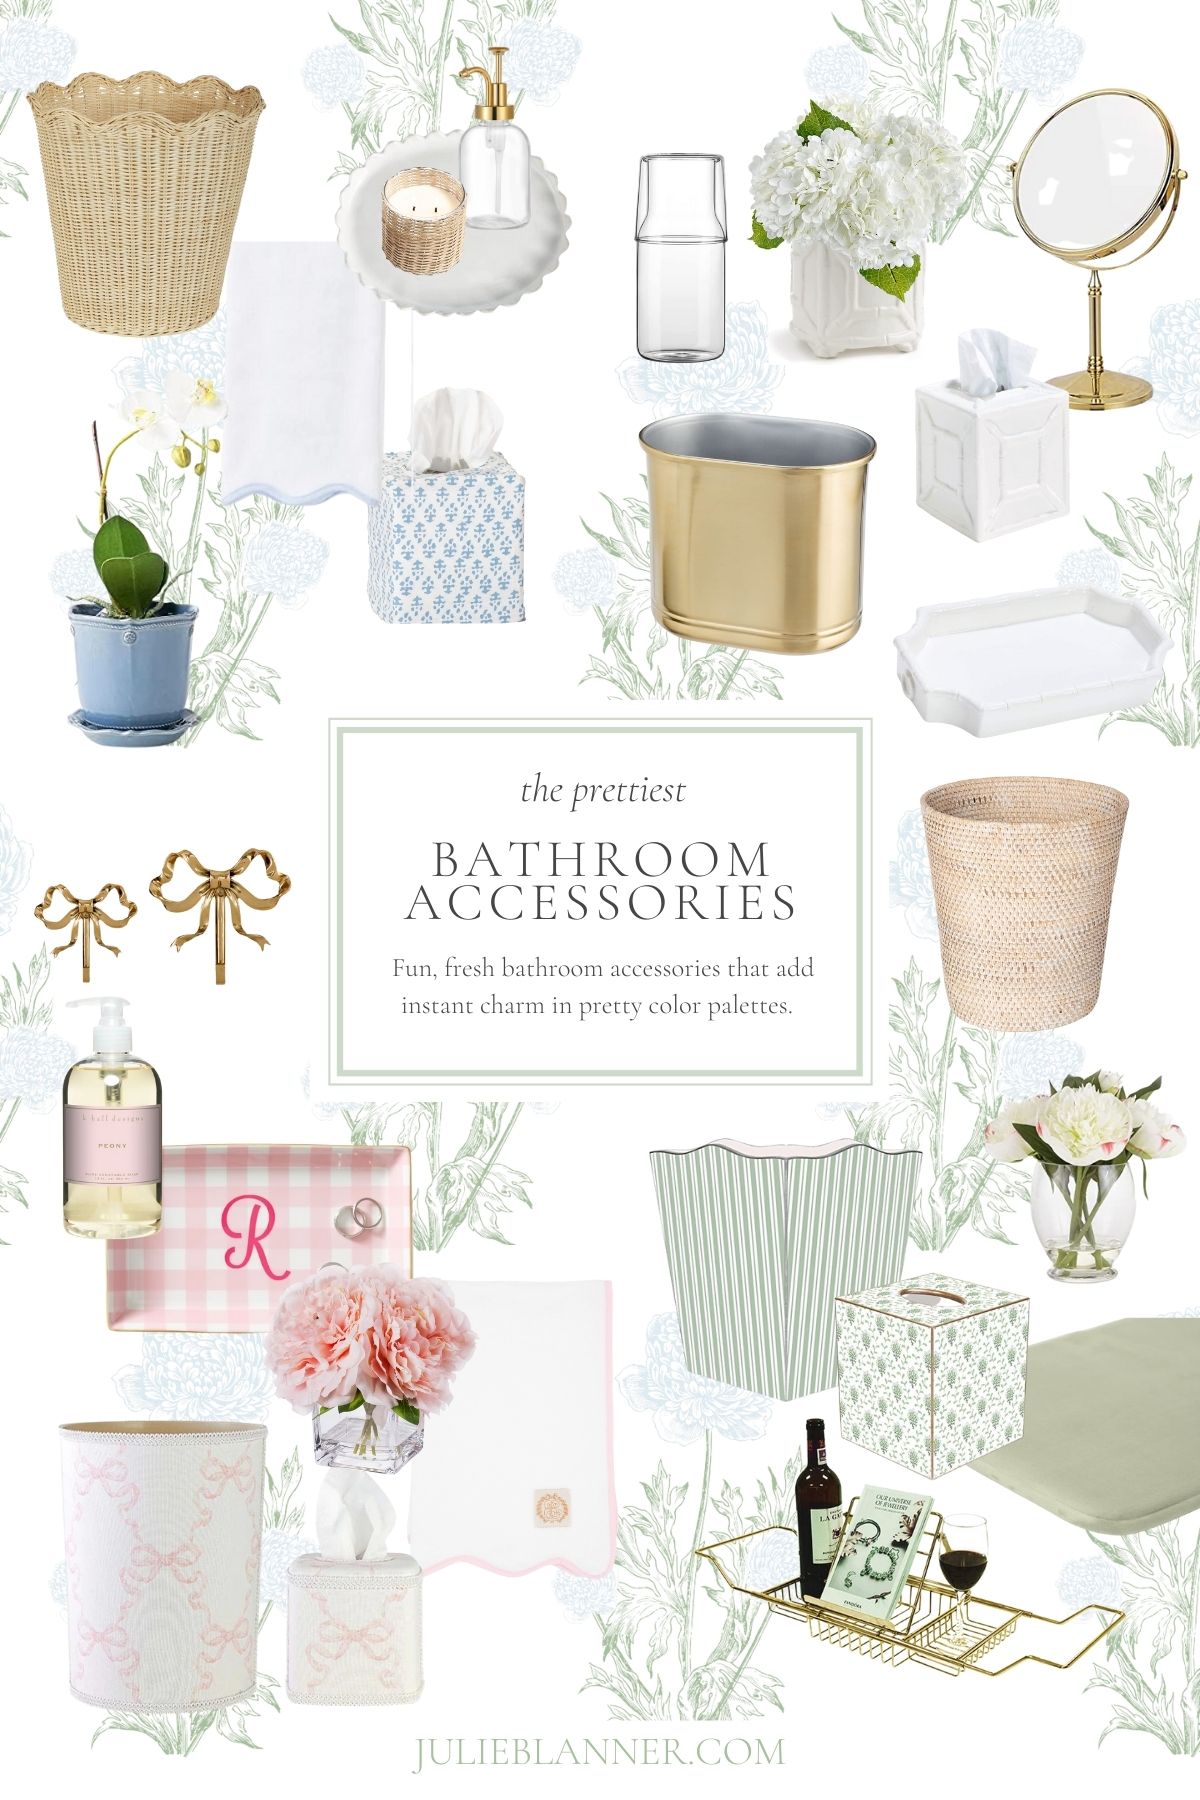 A graphic image featuring a variety of bathroom accessories.